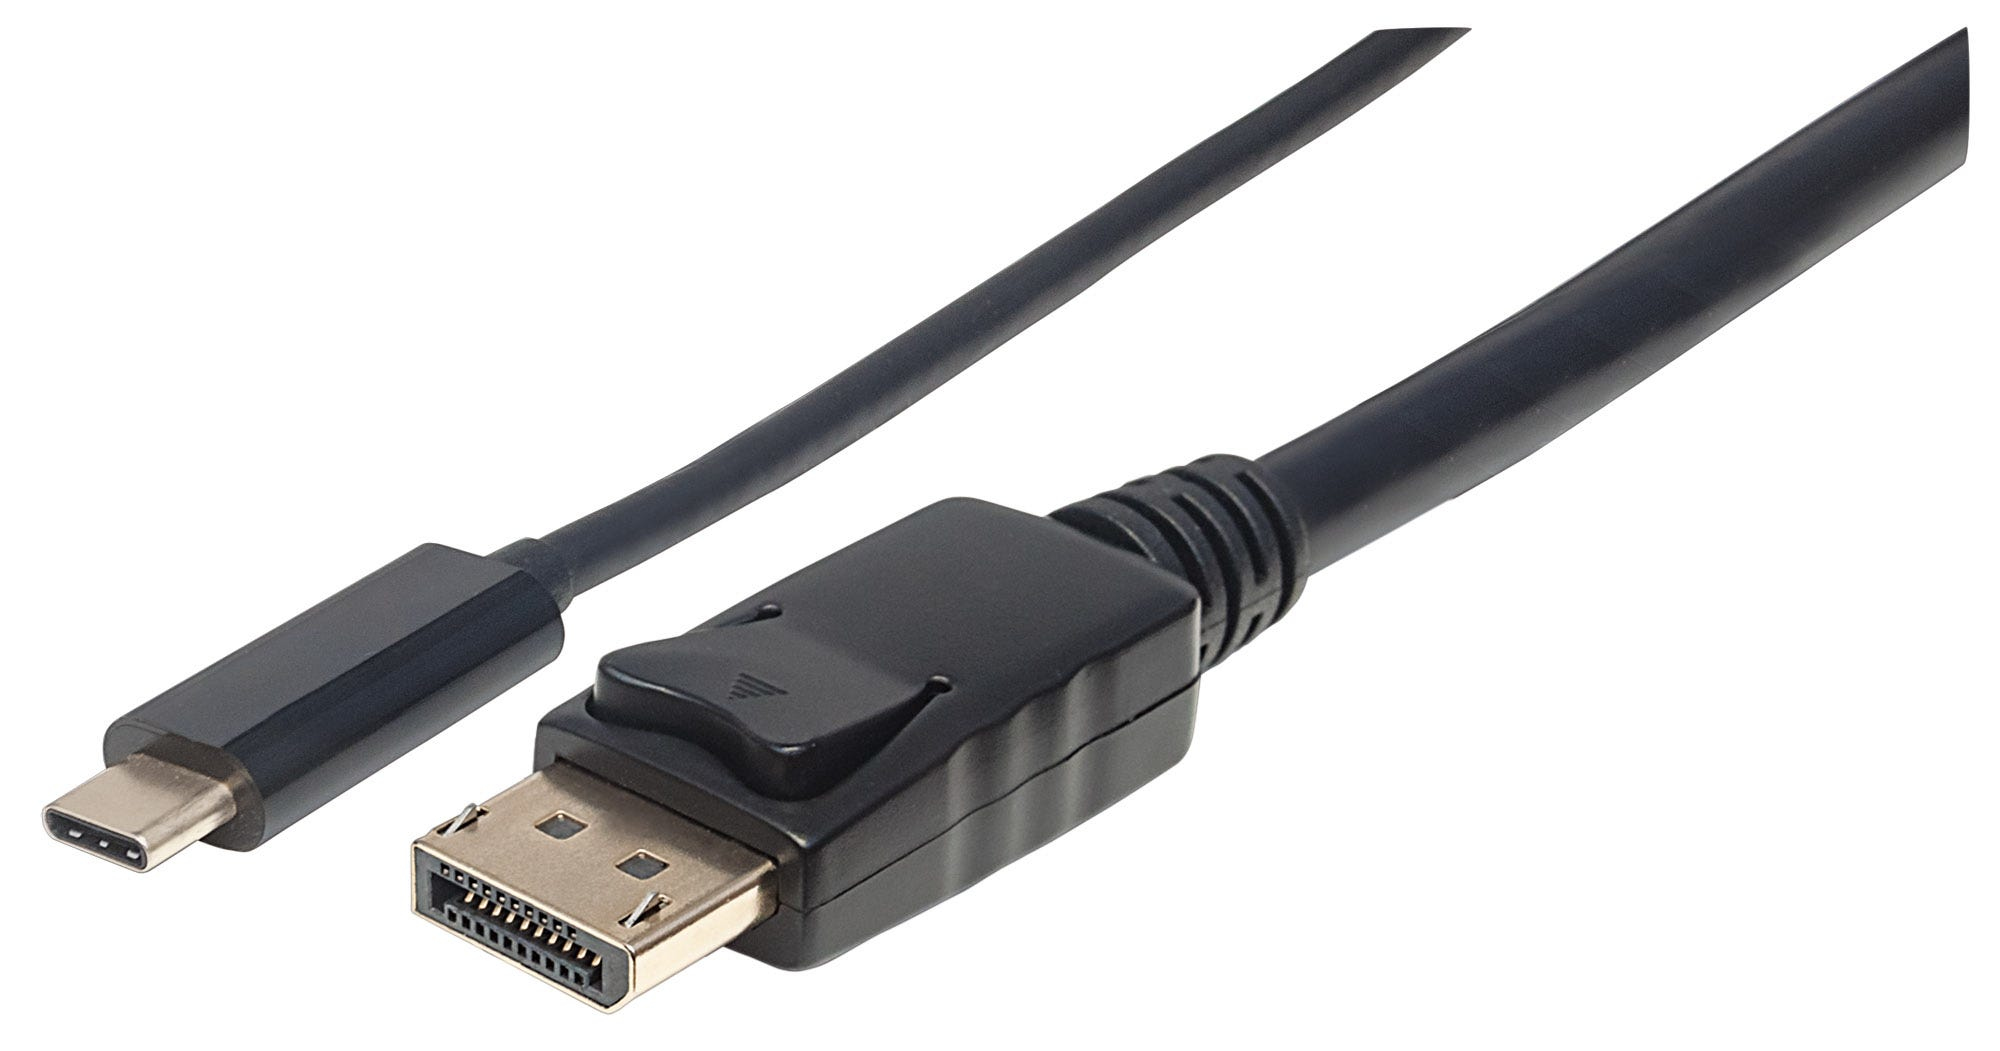 Manhattan USB-C to DisplayPort Cable, 4K@60Hz, 1m, Male to Male, Black, Equivalent to Startech CDP2DP1MBD, Three Year Warranty, Polybag - Adapterkabel - 24 pin USB-C (M)